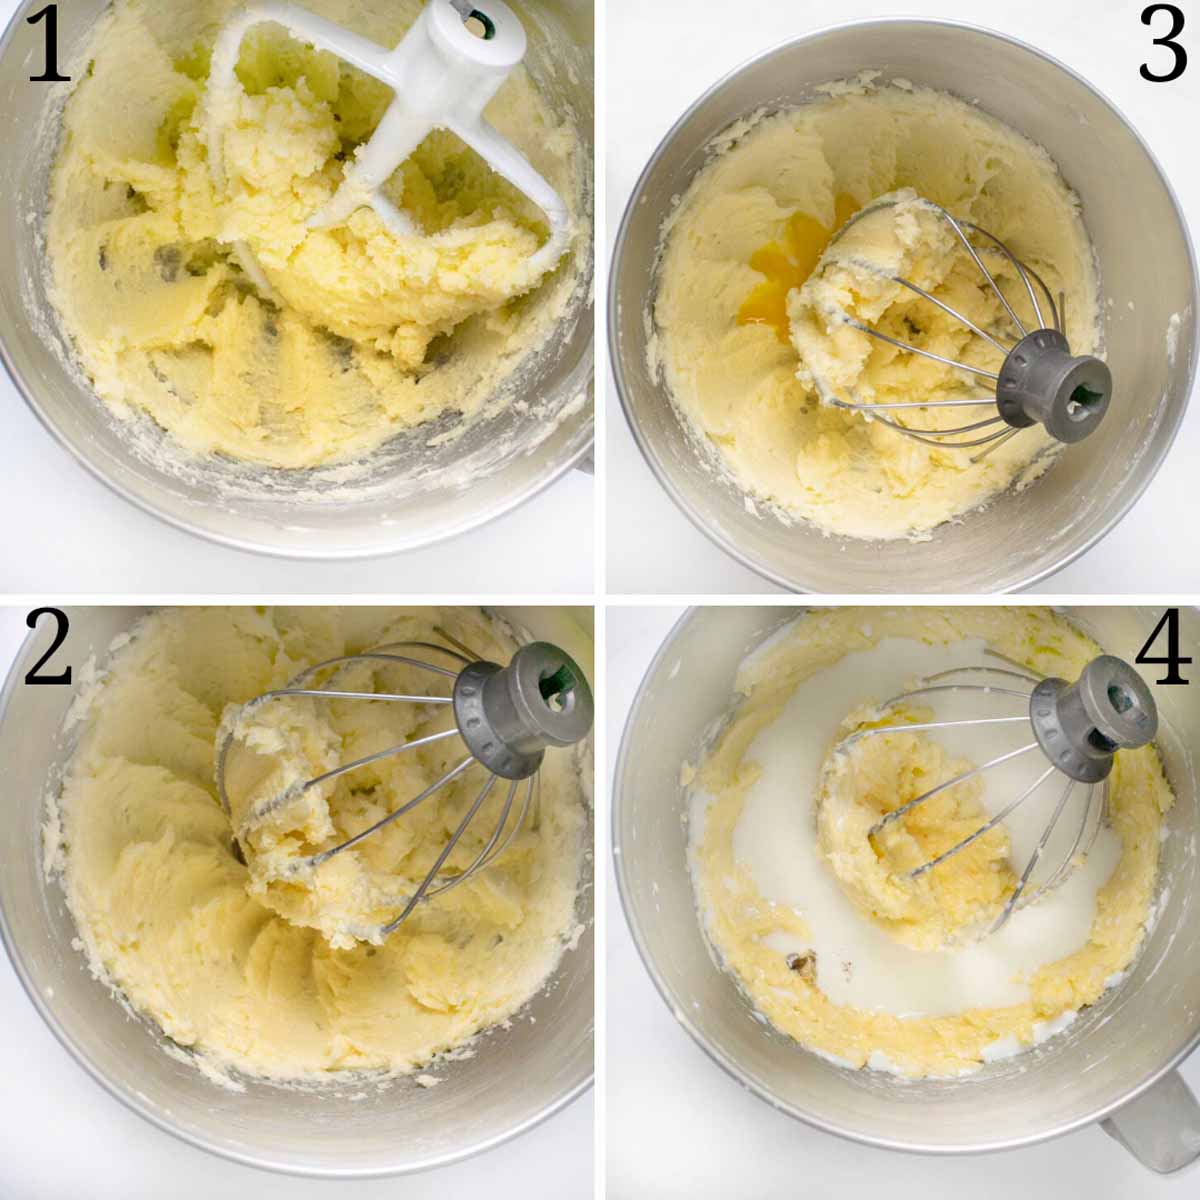 four images showing the first steps in making a yellow cake